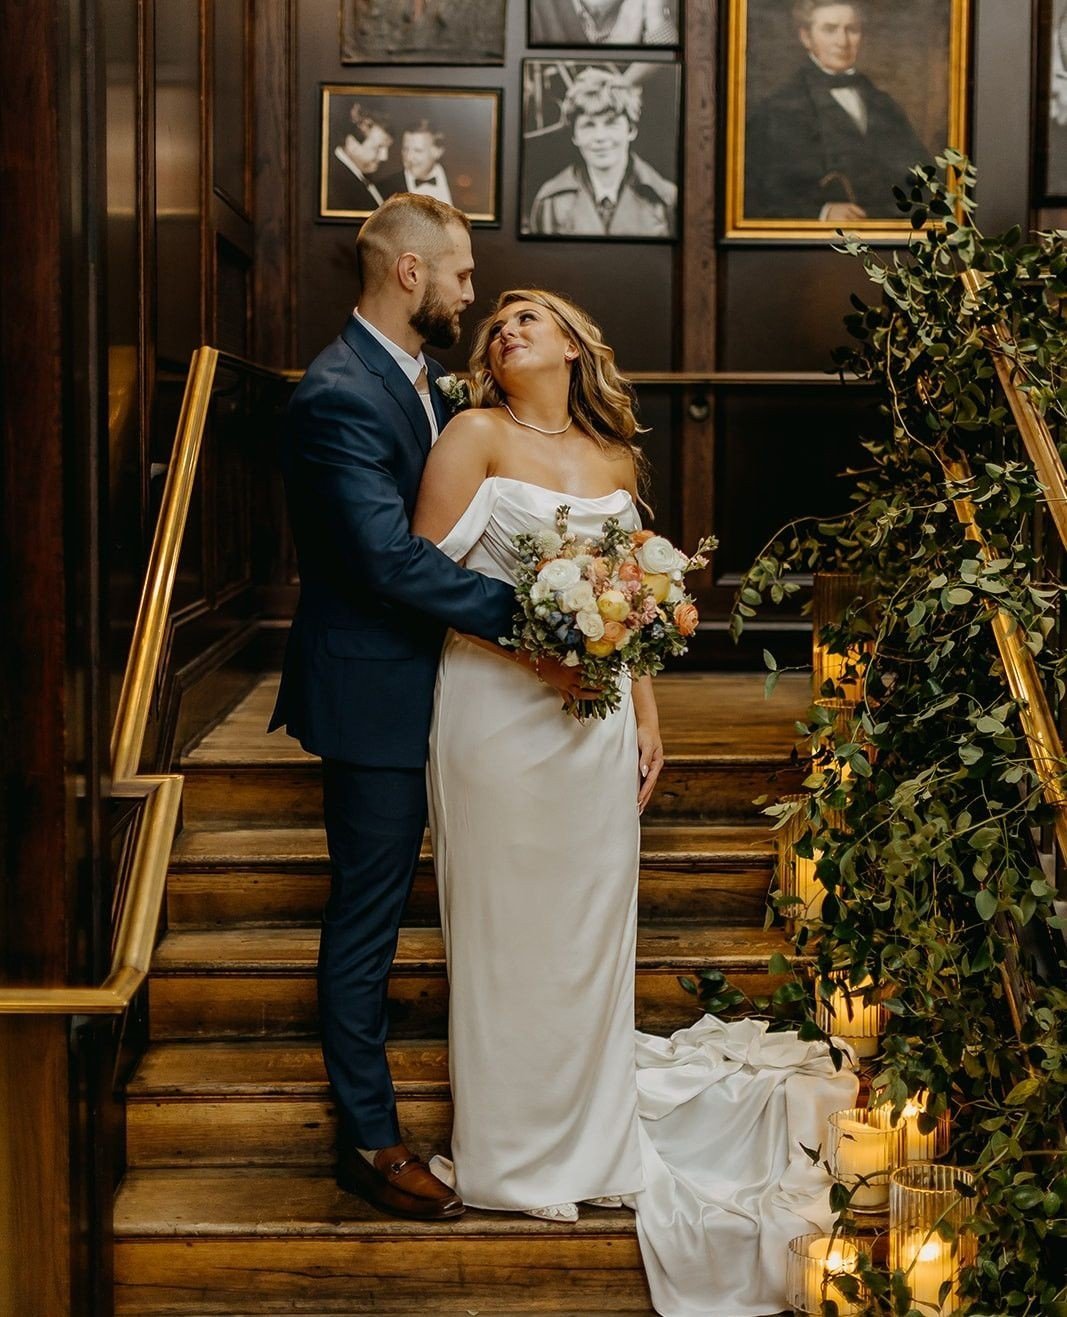 Quintessential Tampa Bay venue - Oxford Exchange! ⁠
⁠
N&amp;E's reception gave us a pure romantic and intimate vibe that is so beautiful and refreshing 🤍⁠
⁠
#makeyourweddingrad⁠
@nicoleols1 ⁠
@eric_goody18⁠
⁠
⁠
vendors___⁠
@oxfordexchange⁠
@tailored